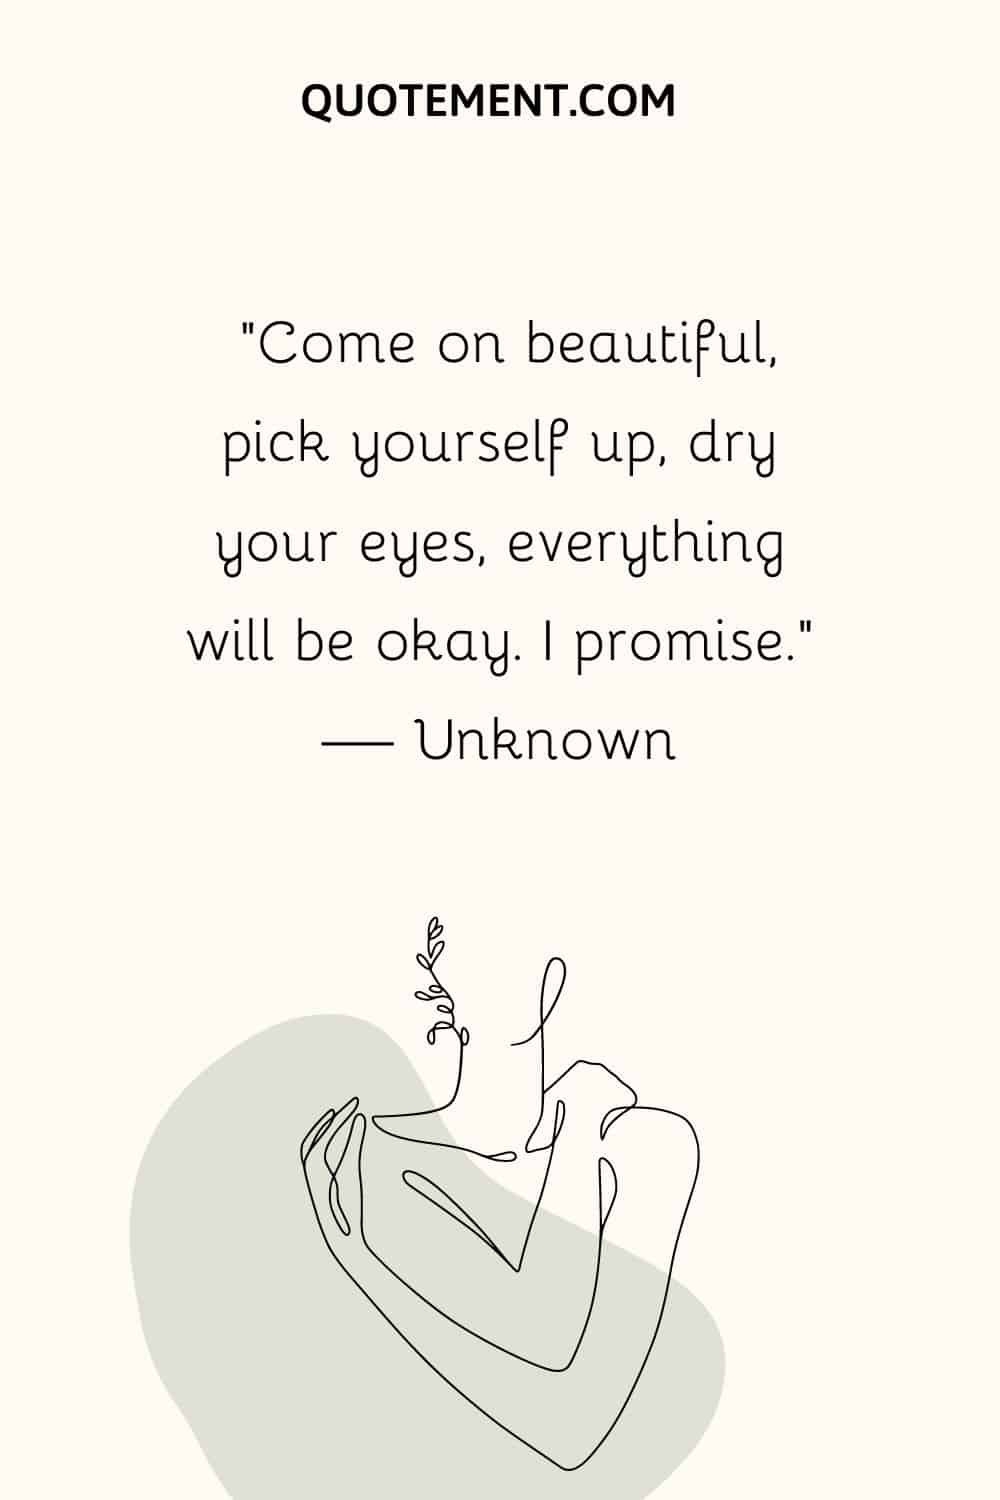 “Come on beautiful, pick yourself up, dry your eyes, everything will be okay. I promise.” — Unknown